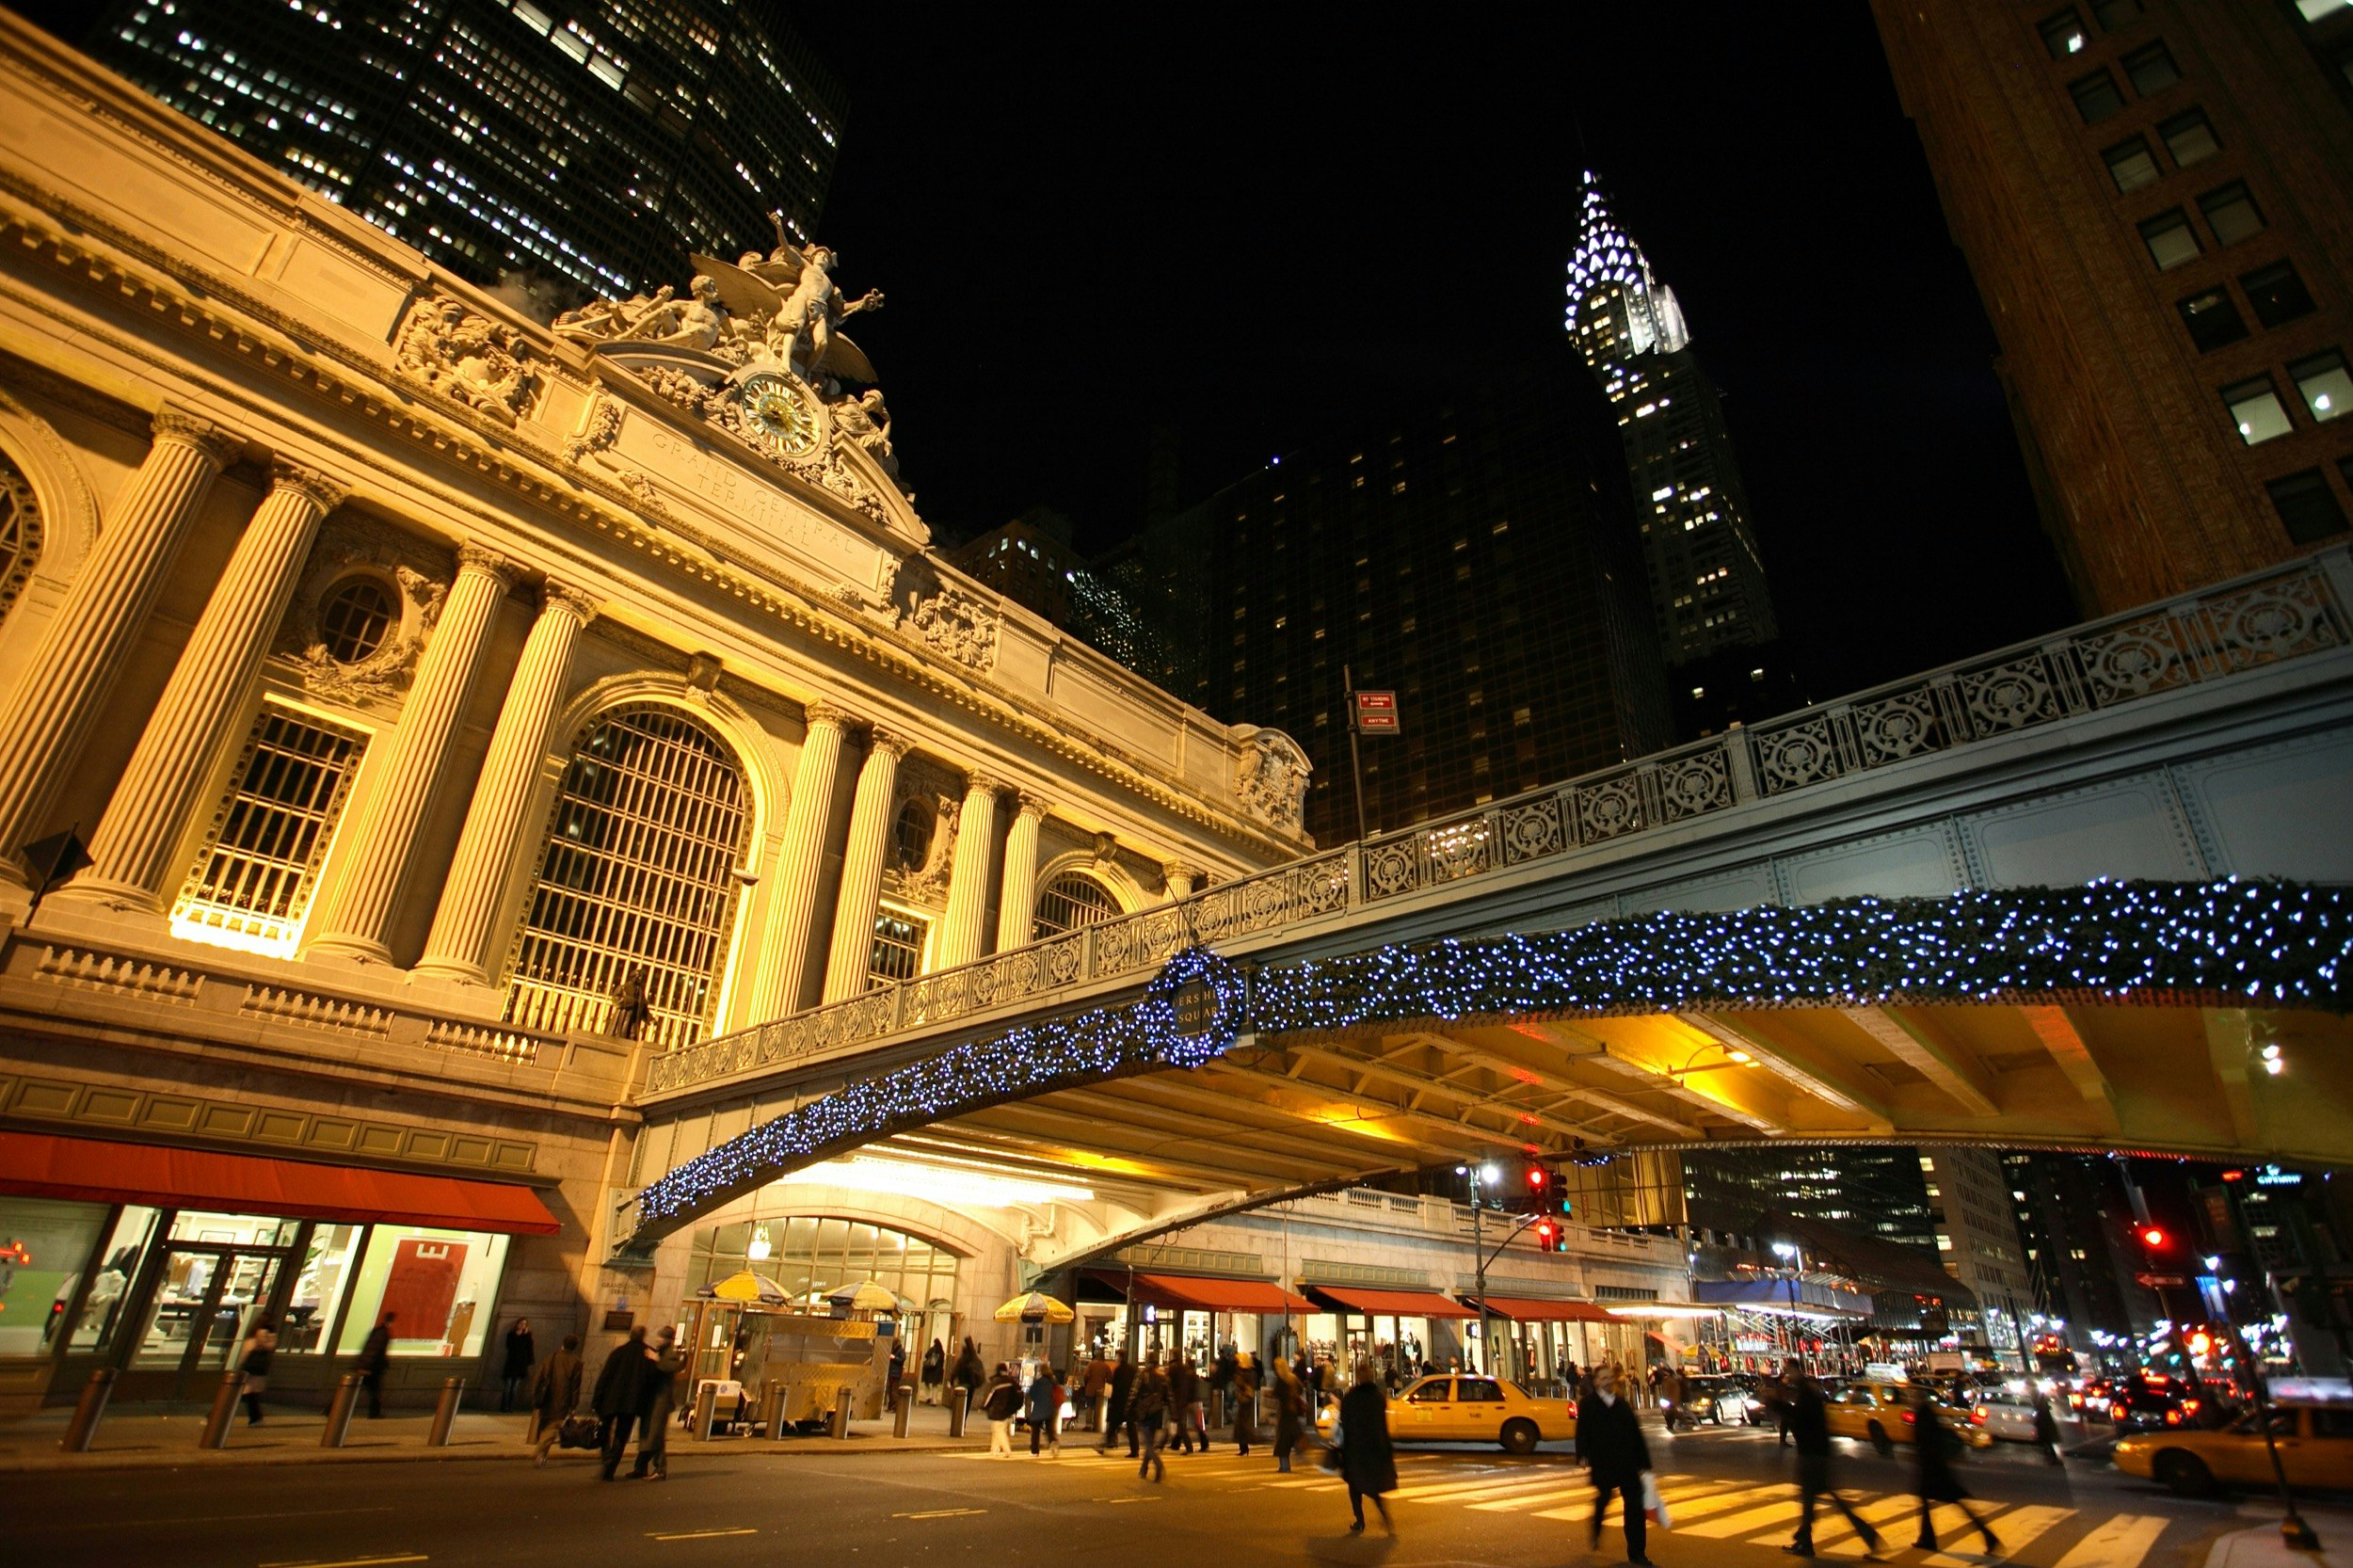 Christmas lights and a wreath shine around the exterior of New York City's Grand Central Station at night